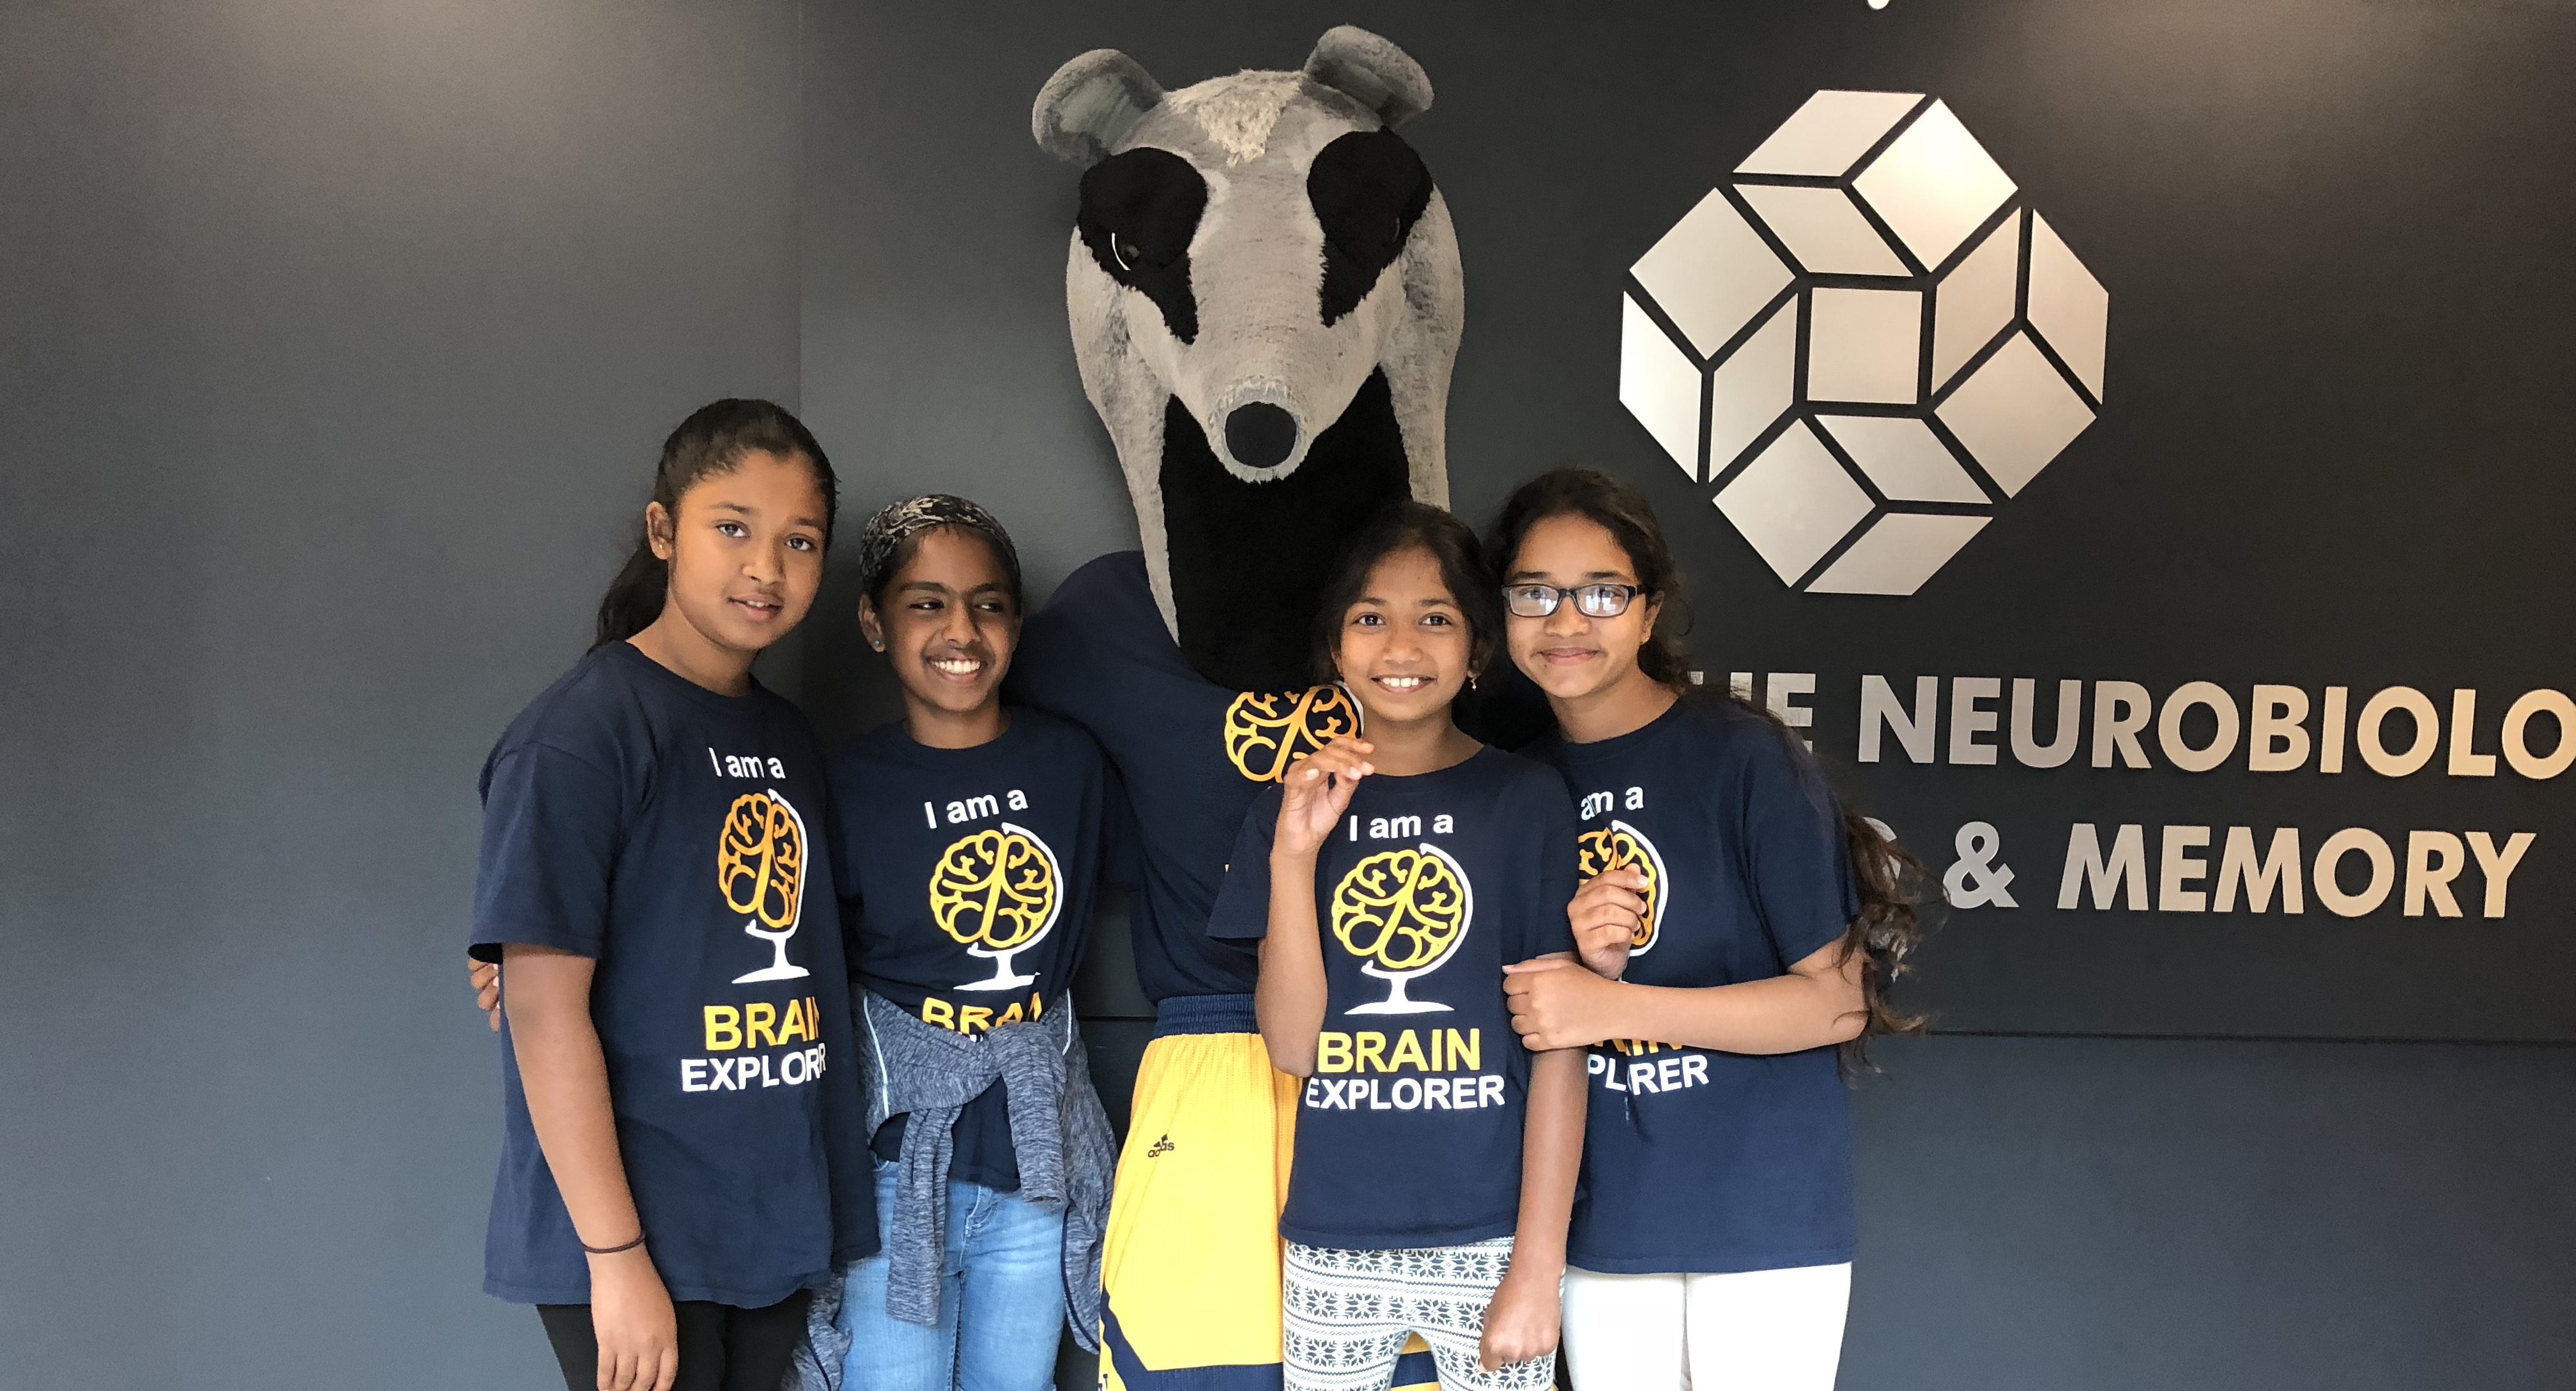 Brain Explorer Academy students pose with Peter the Anteater